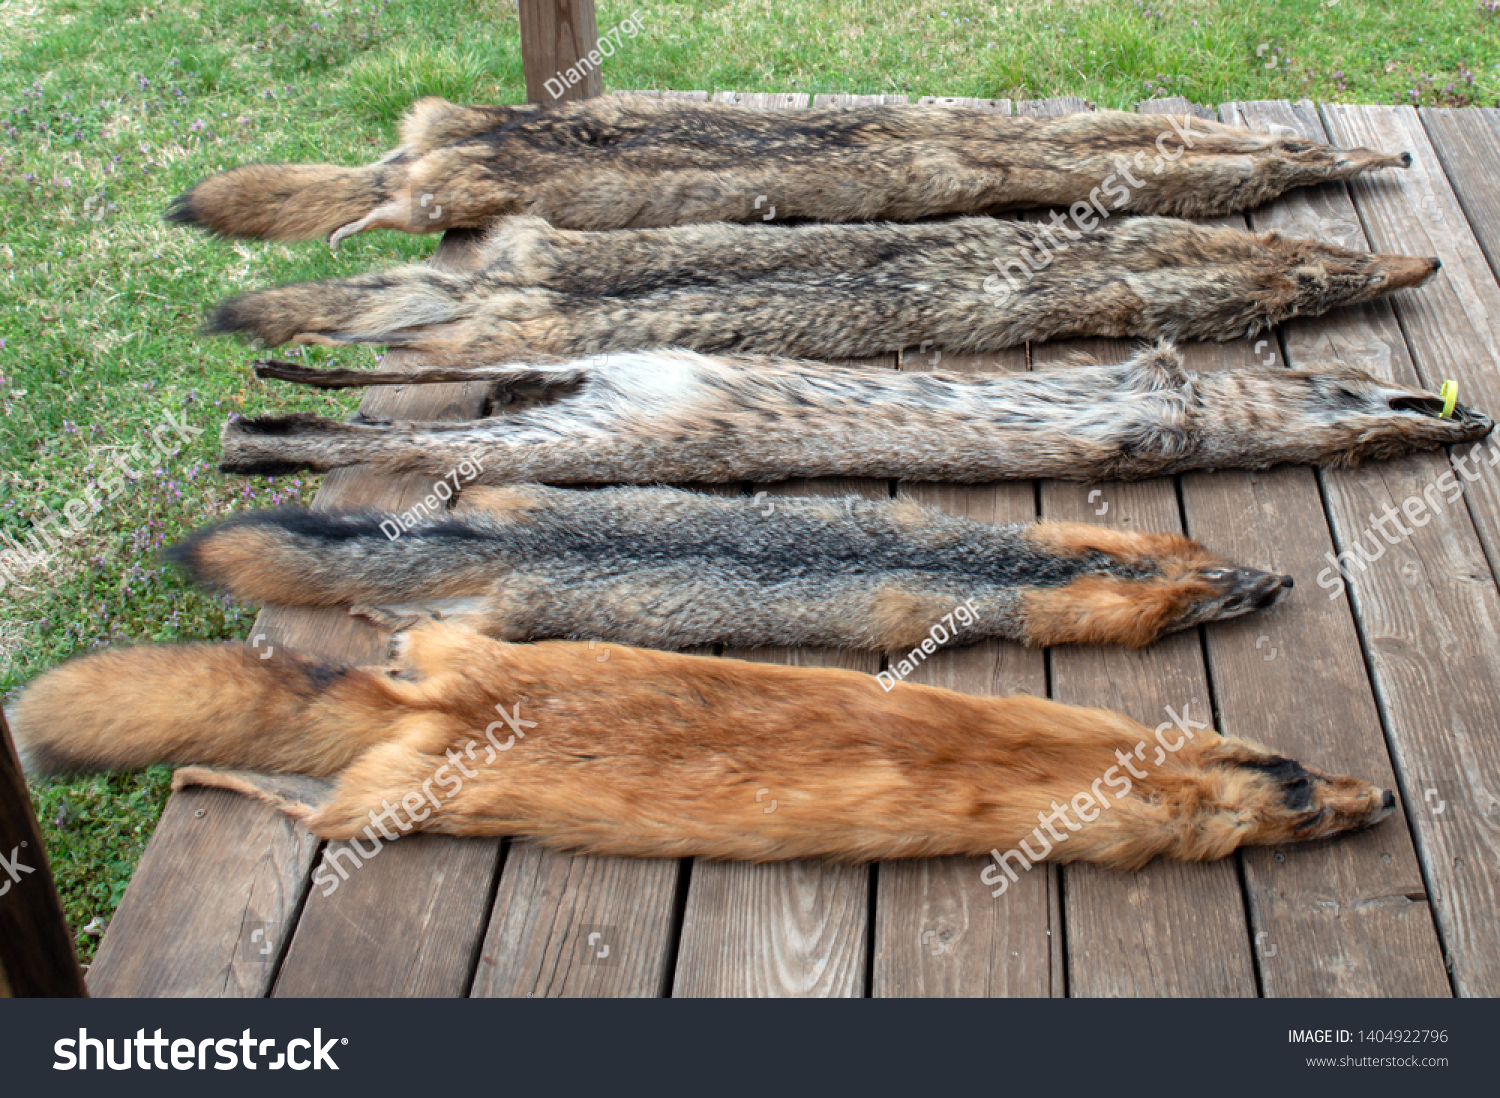 After trapping season, predator animal pelts are displayed on the backyard deck in Missouri. The furs will soon go to market. Bokeh effect. #1404922796